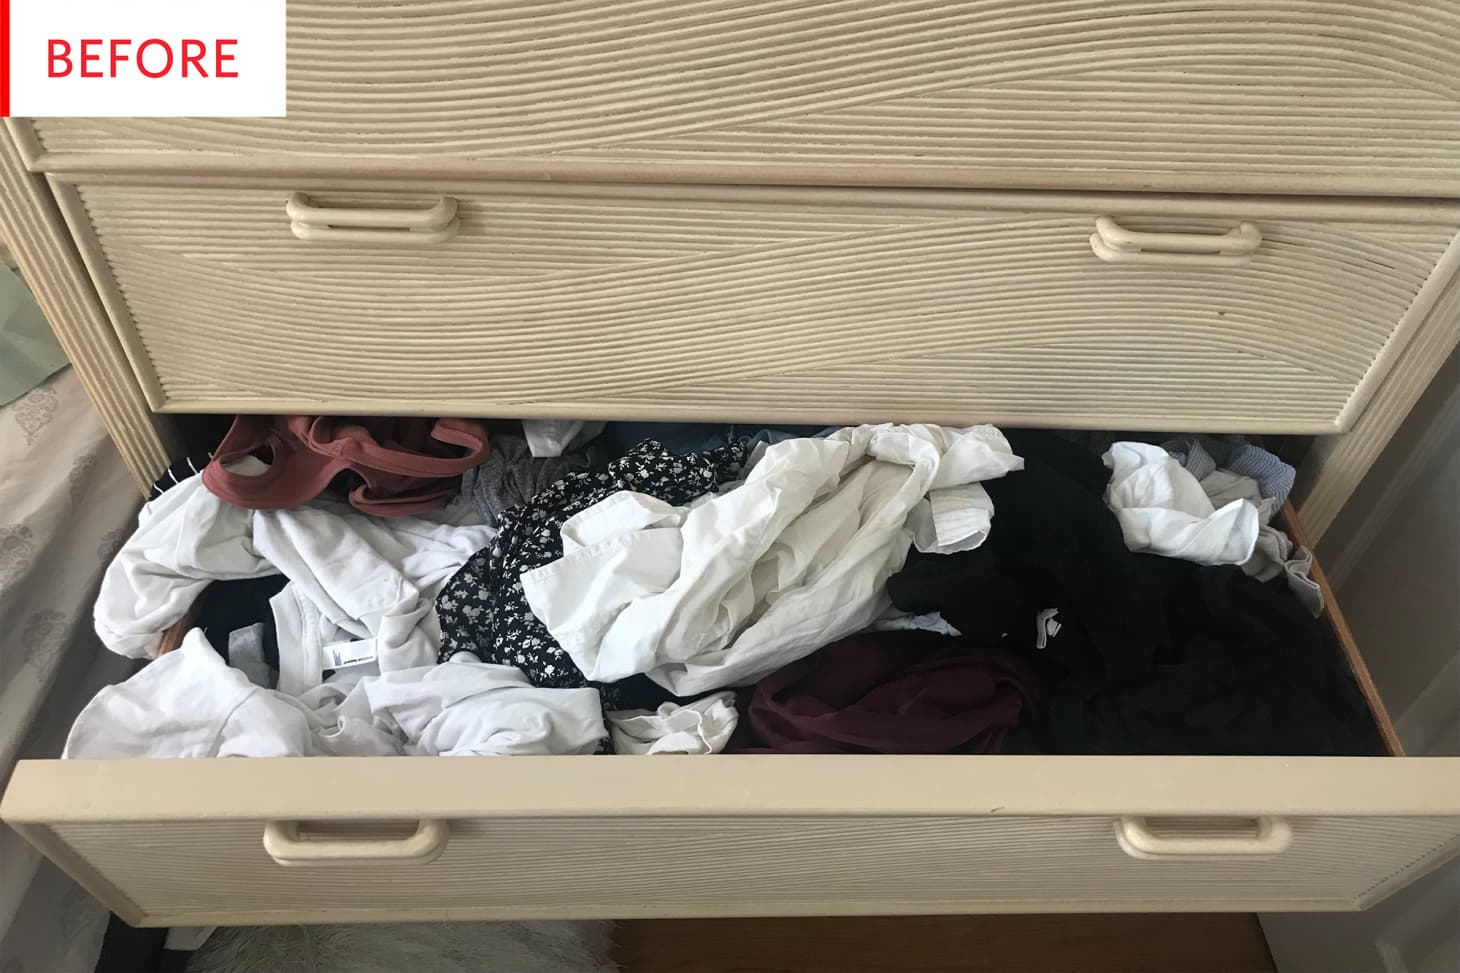 marie kondo declutter before and after